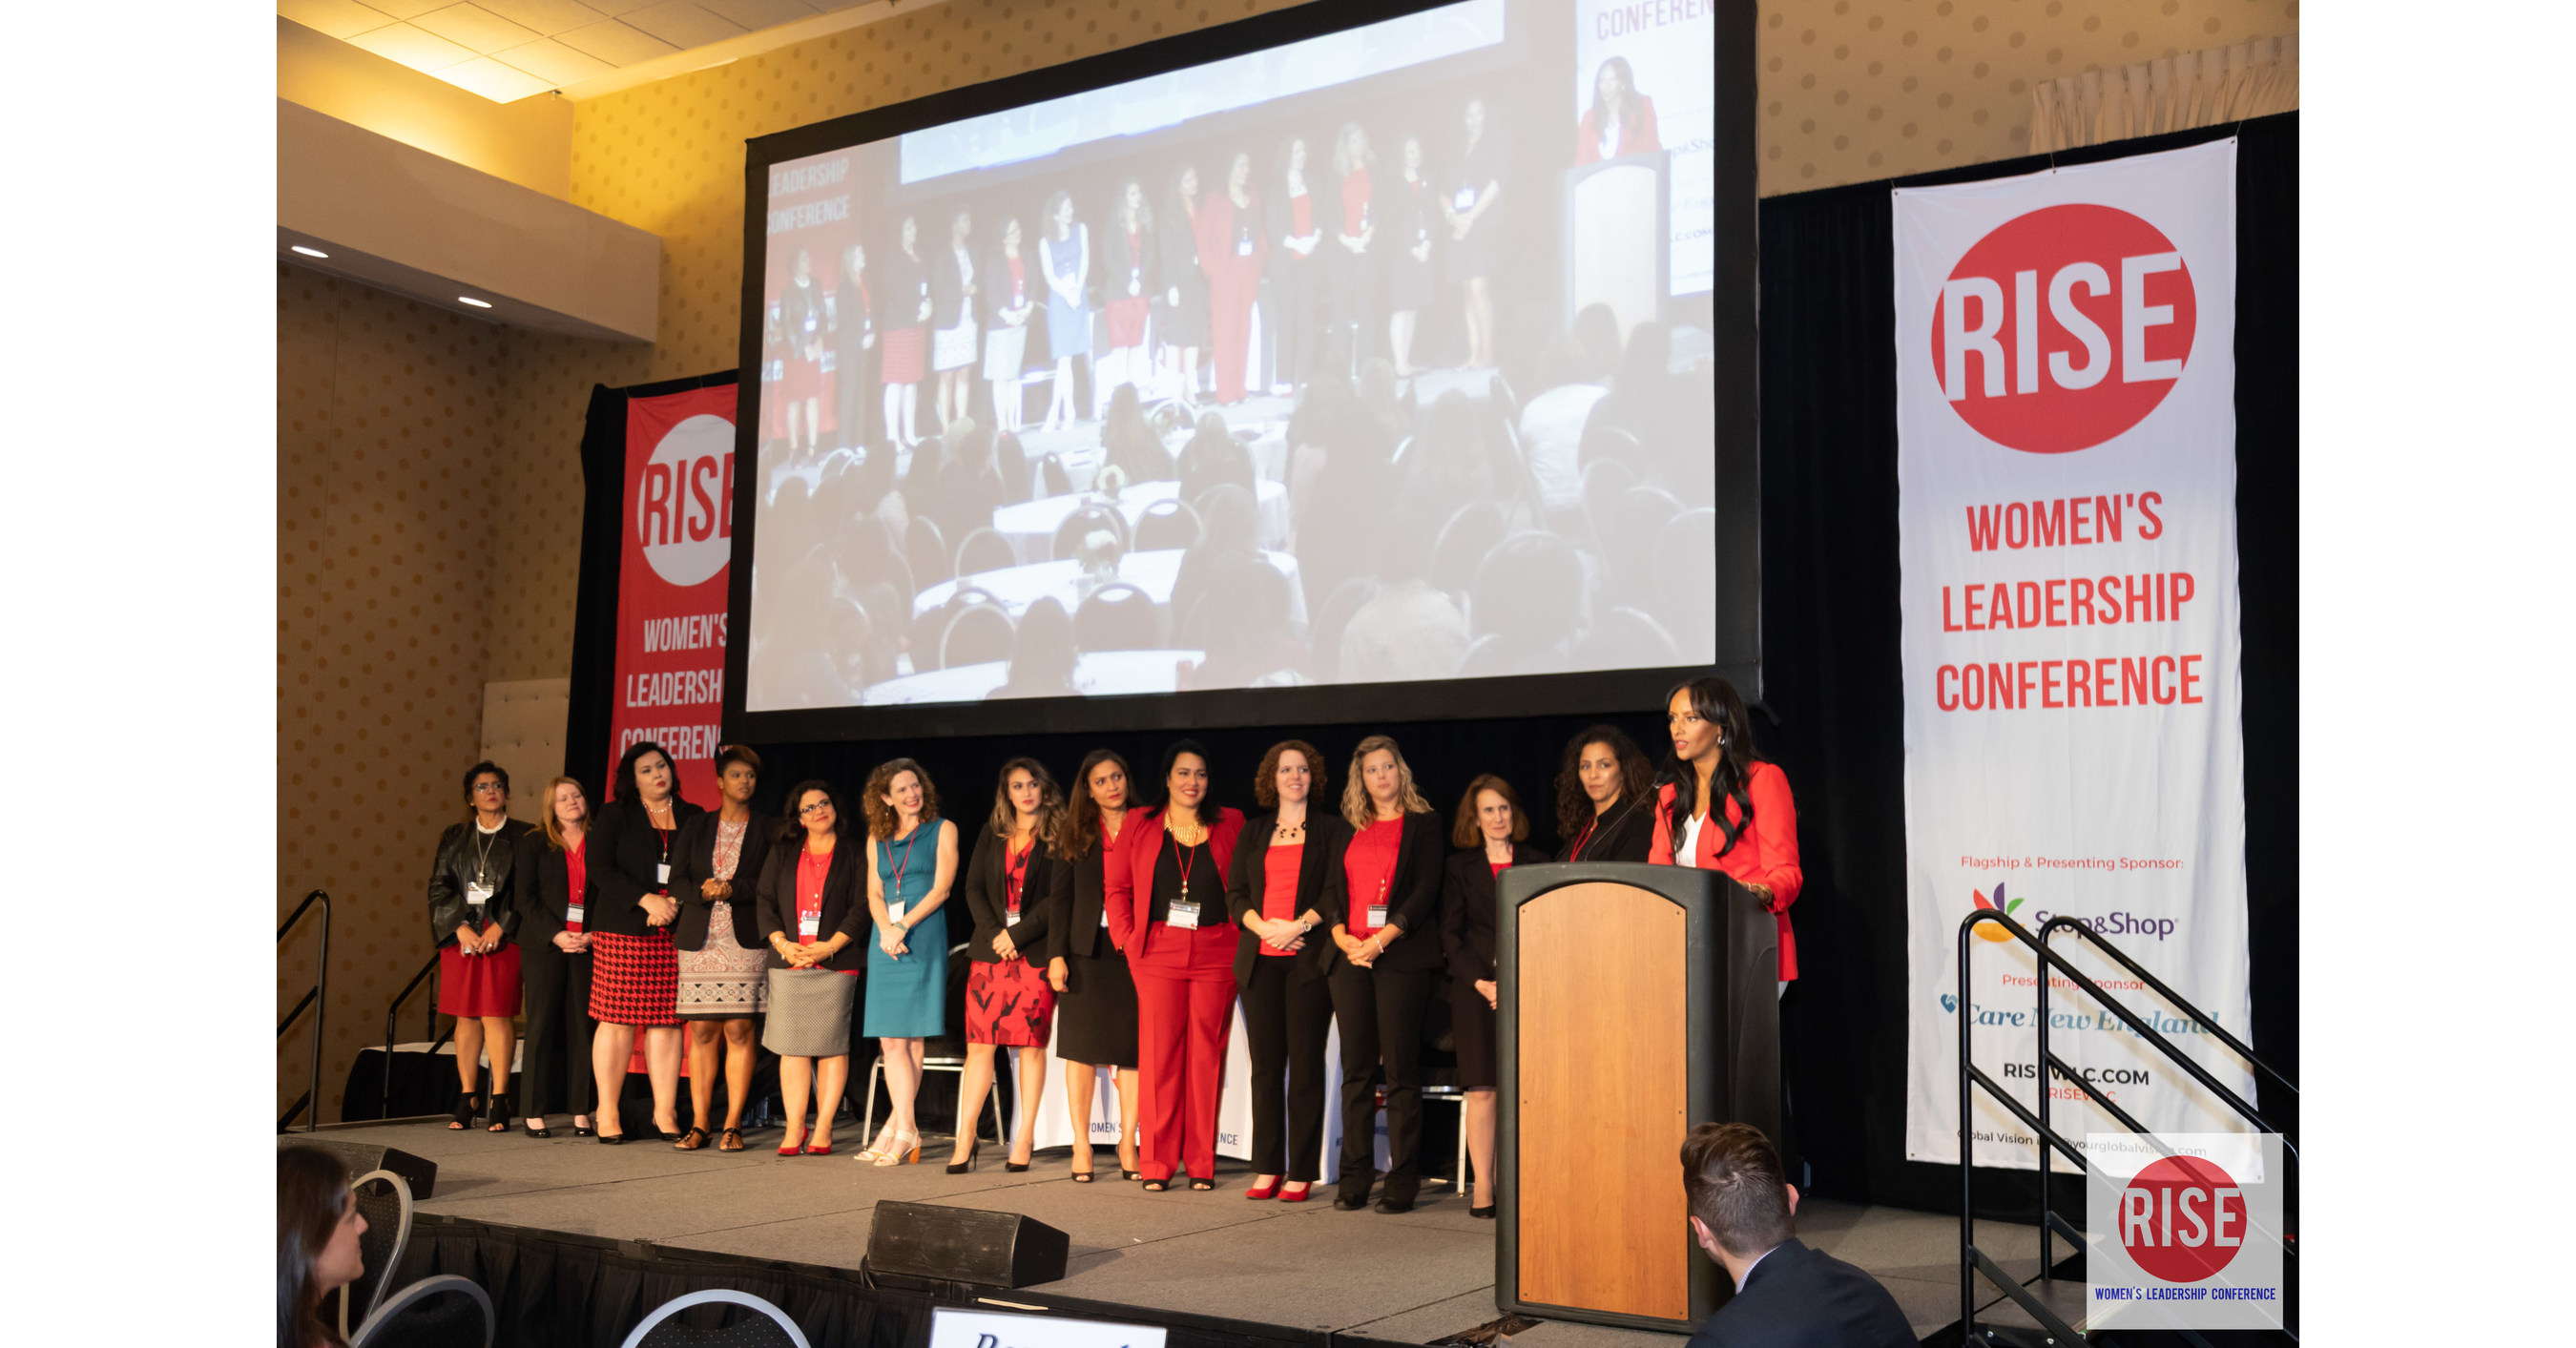 R.I.S.E Women's Leadership Conference Sets Stage for Thought Leadership